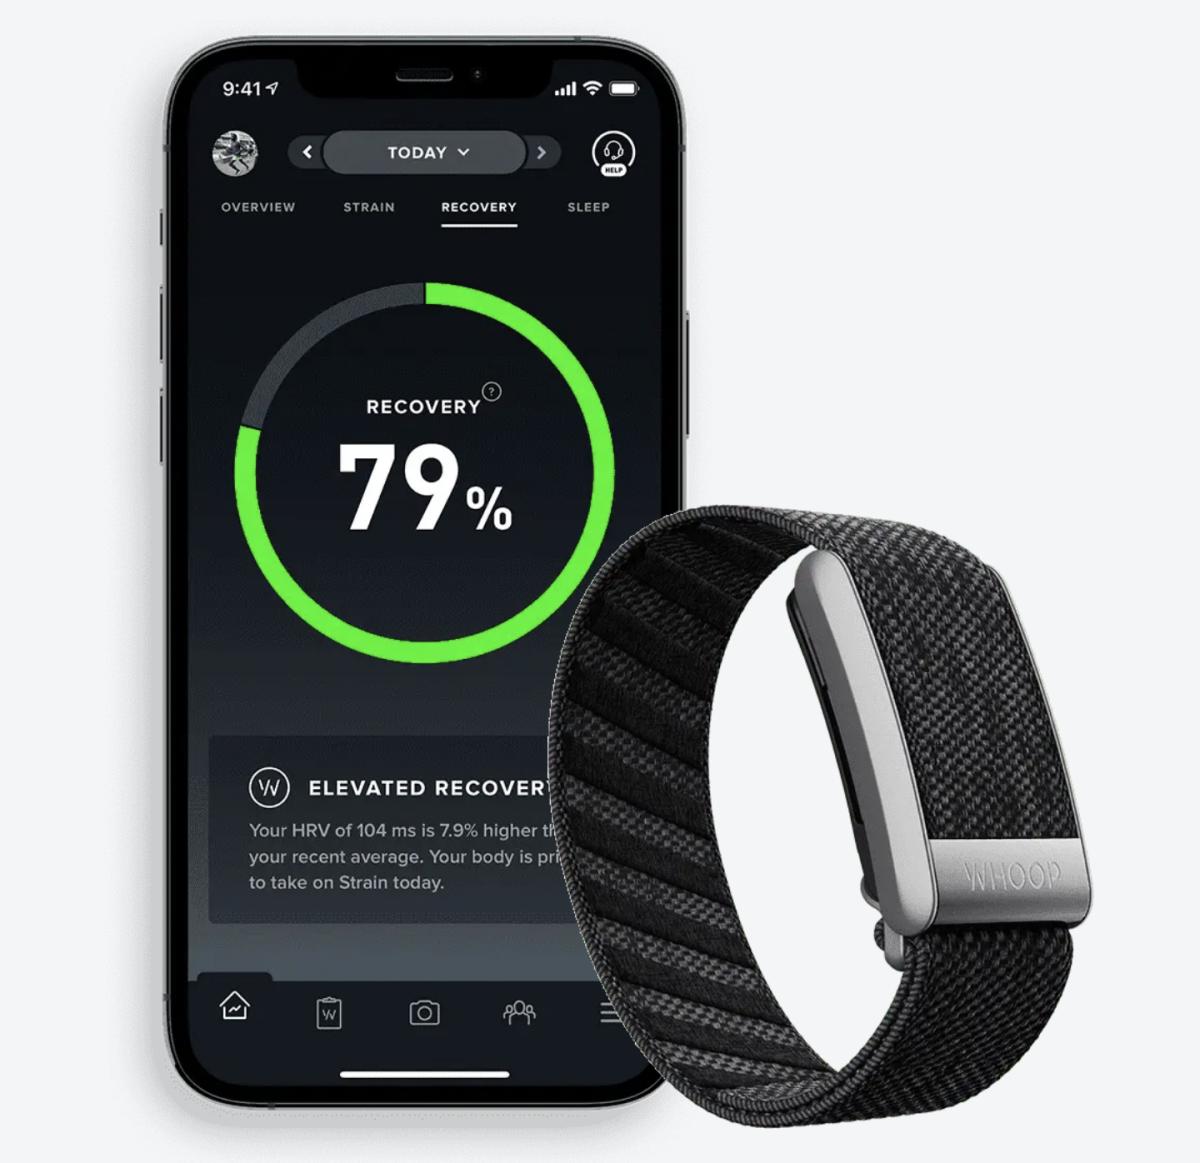 WHOOP 4.0 wearable is smaller, smarter and included with membership